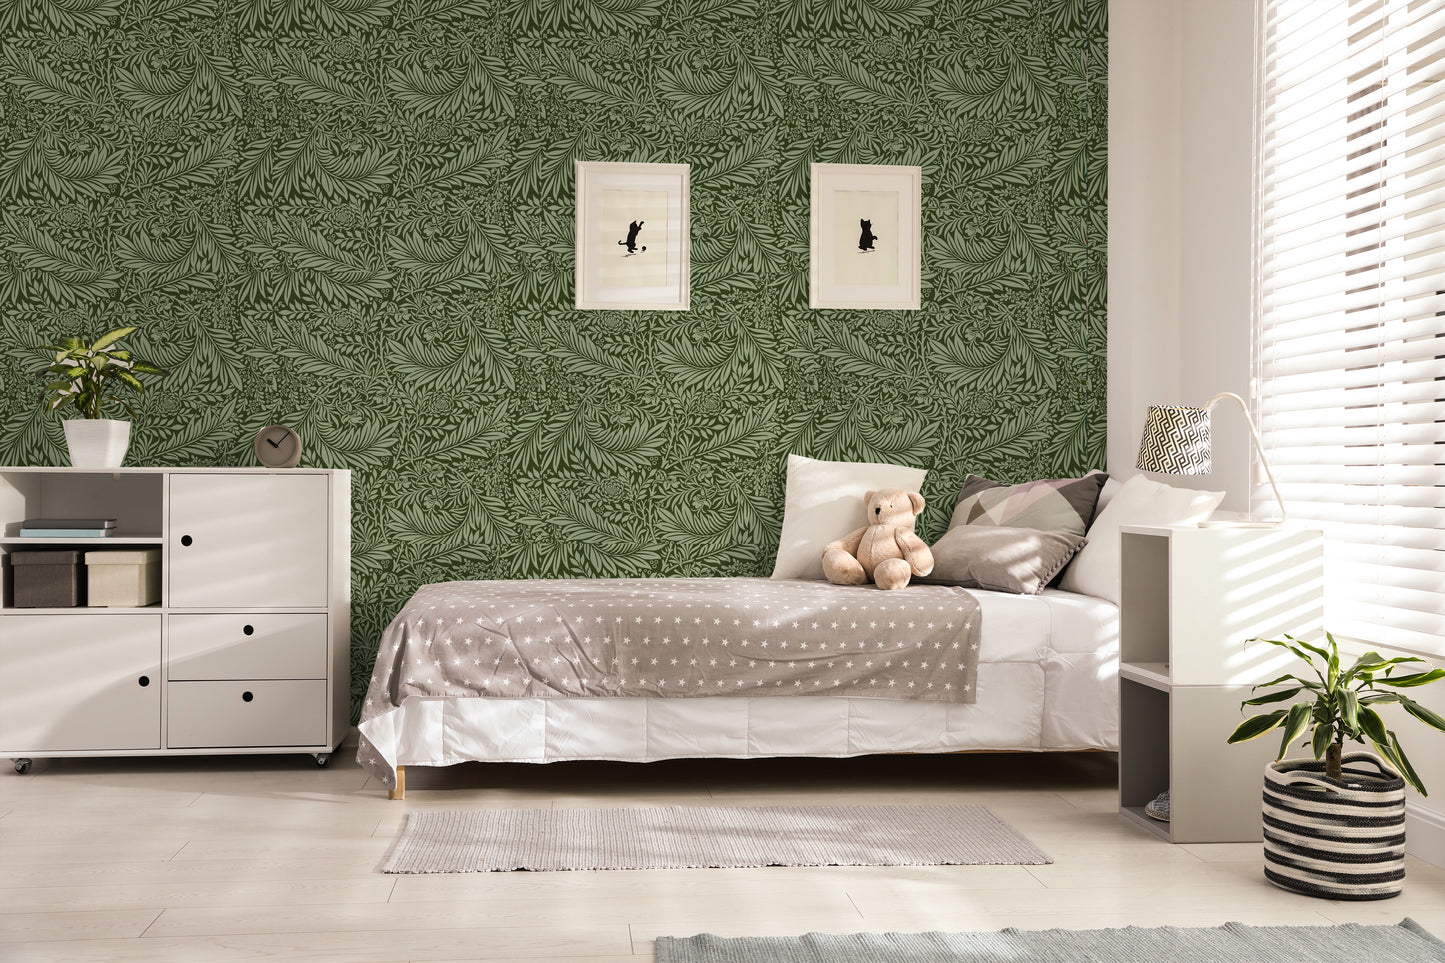 Mossy Mood Removable Peel And Stick Wallpaper